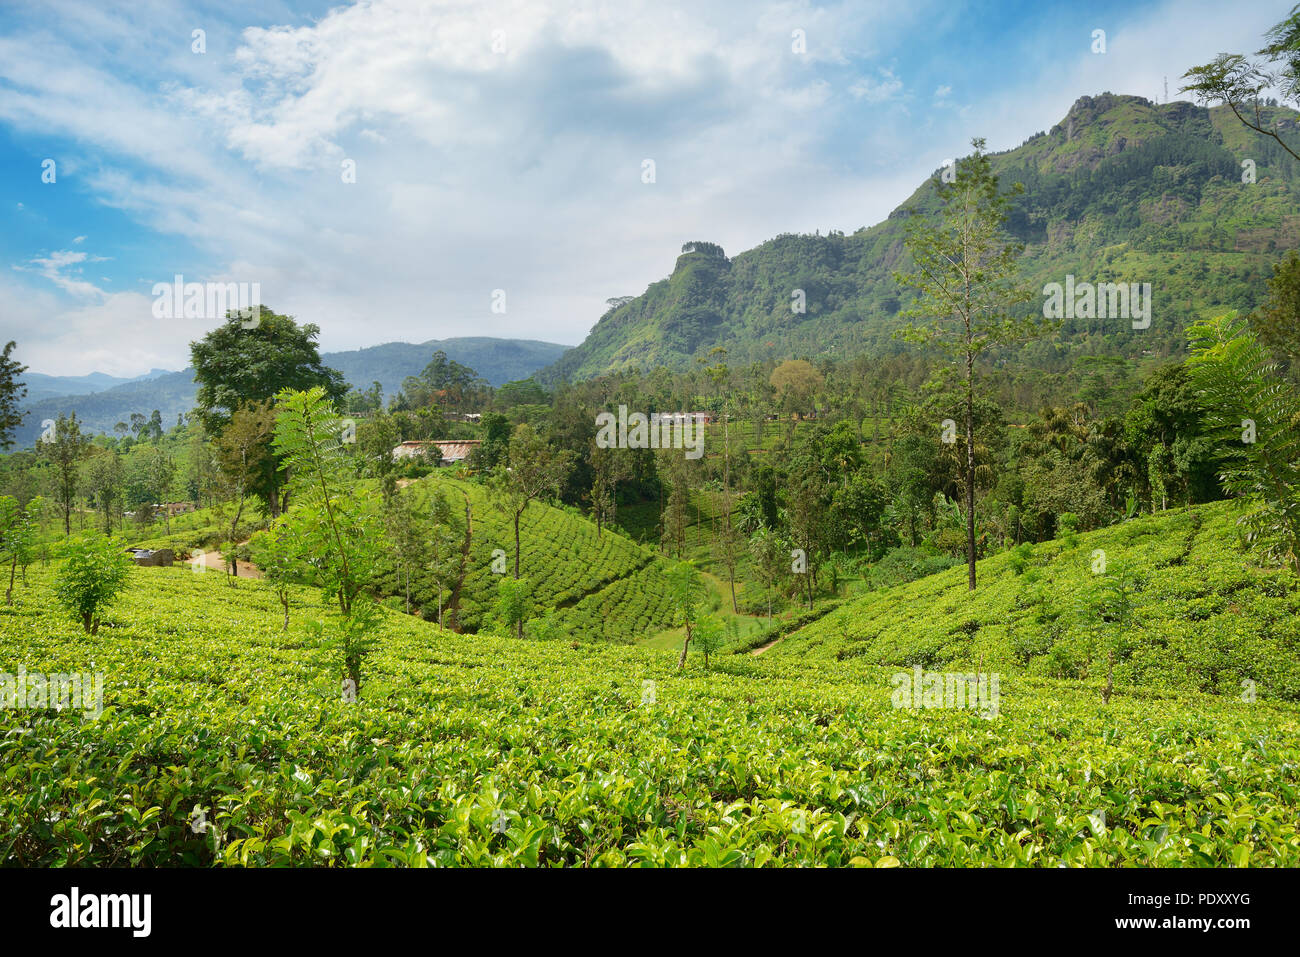 Tea plantations in the picturesque mountains and blue sky. Stock Photo